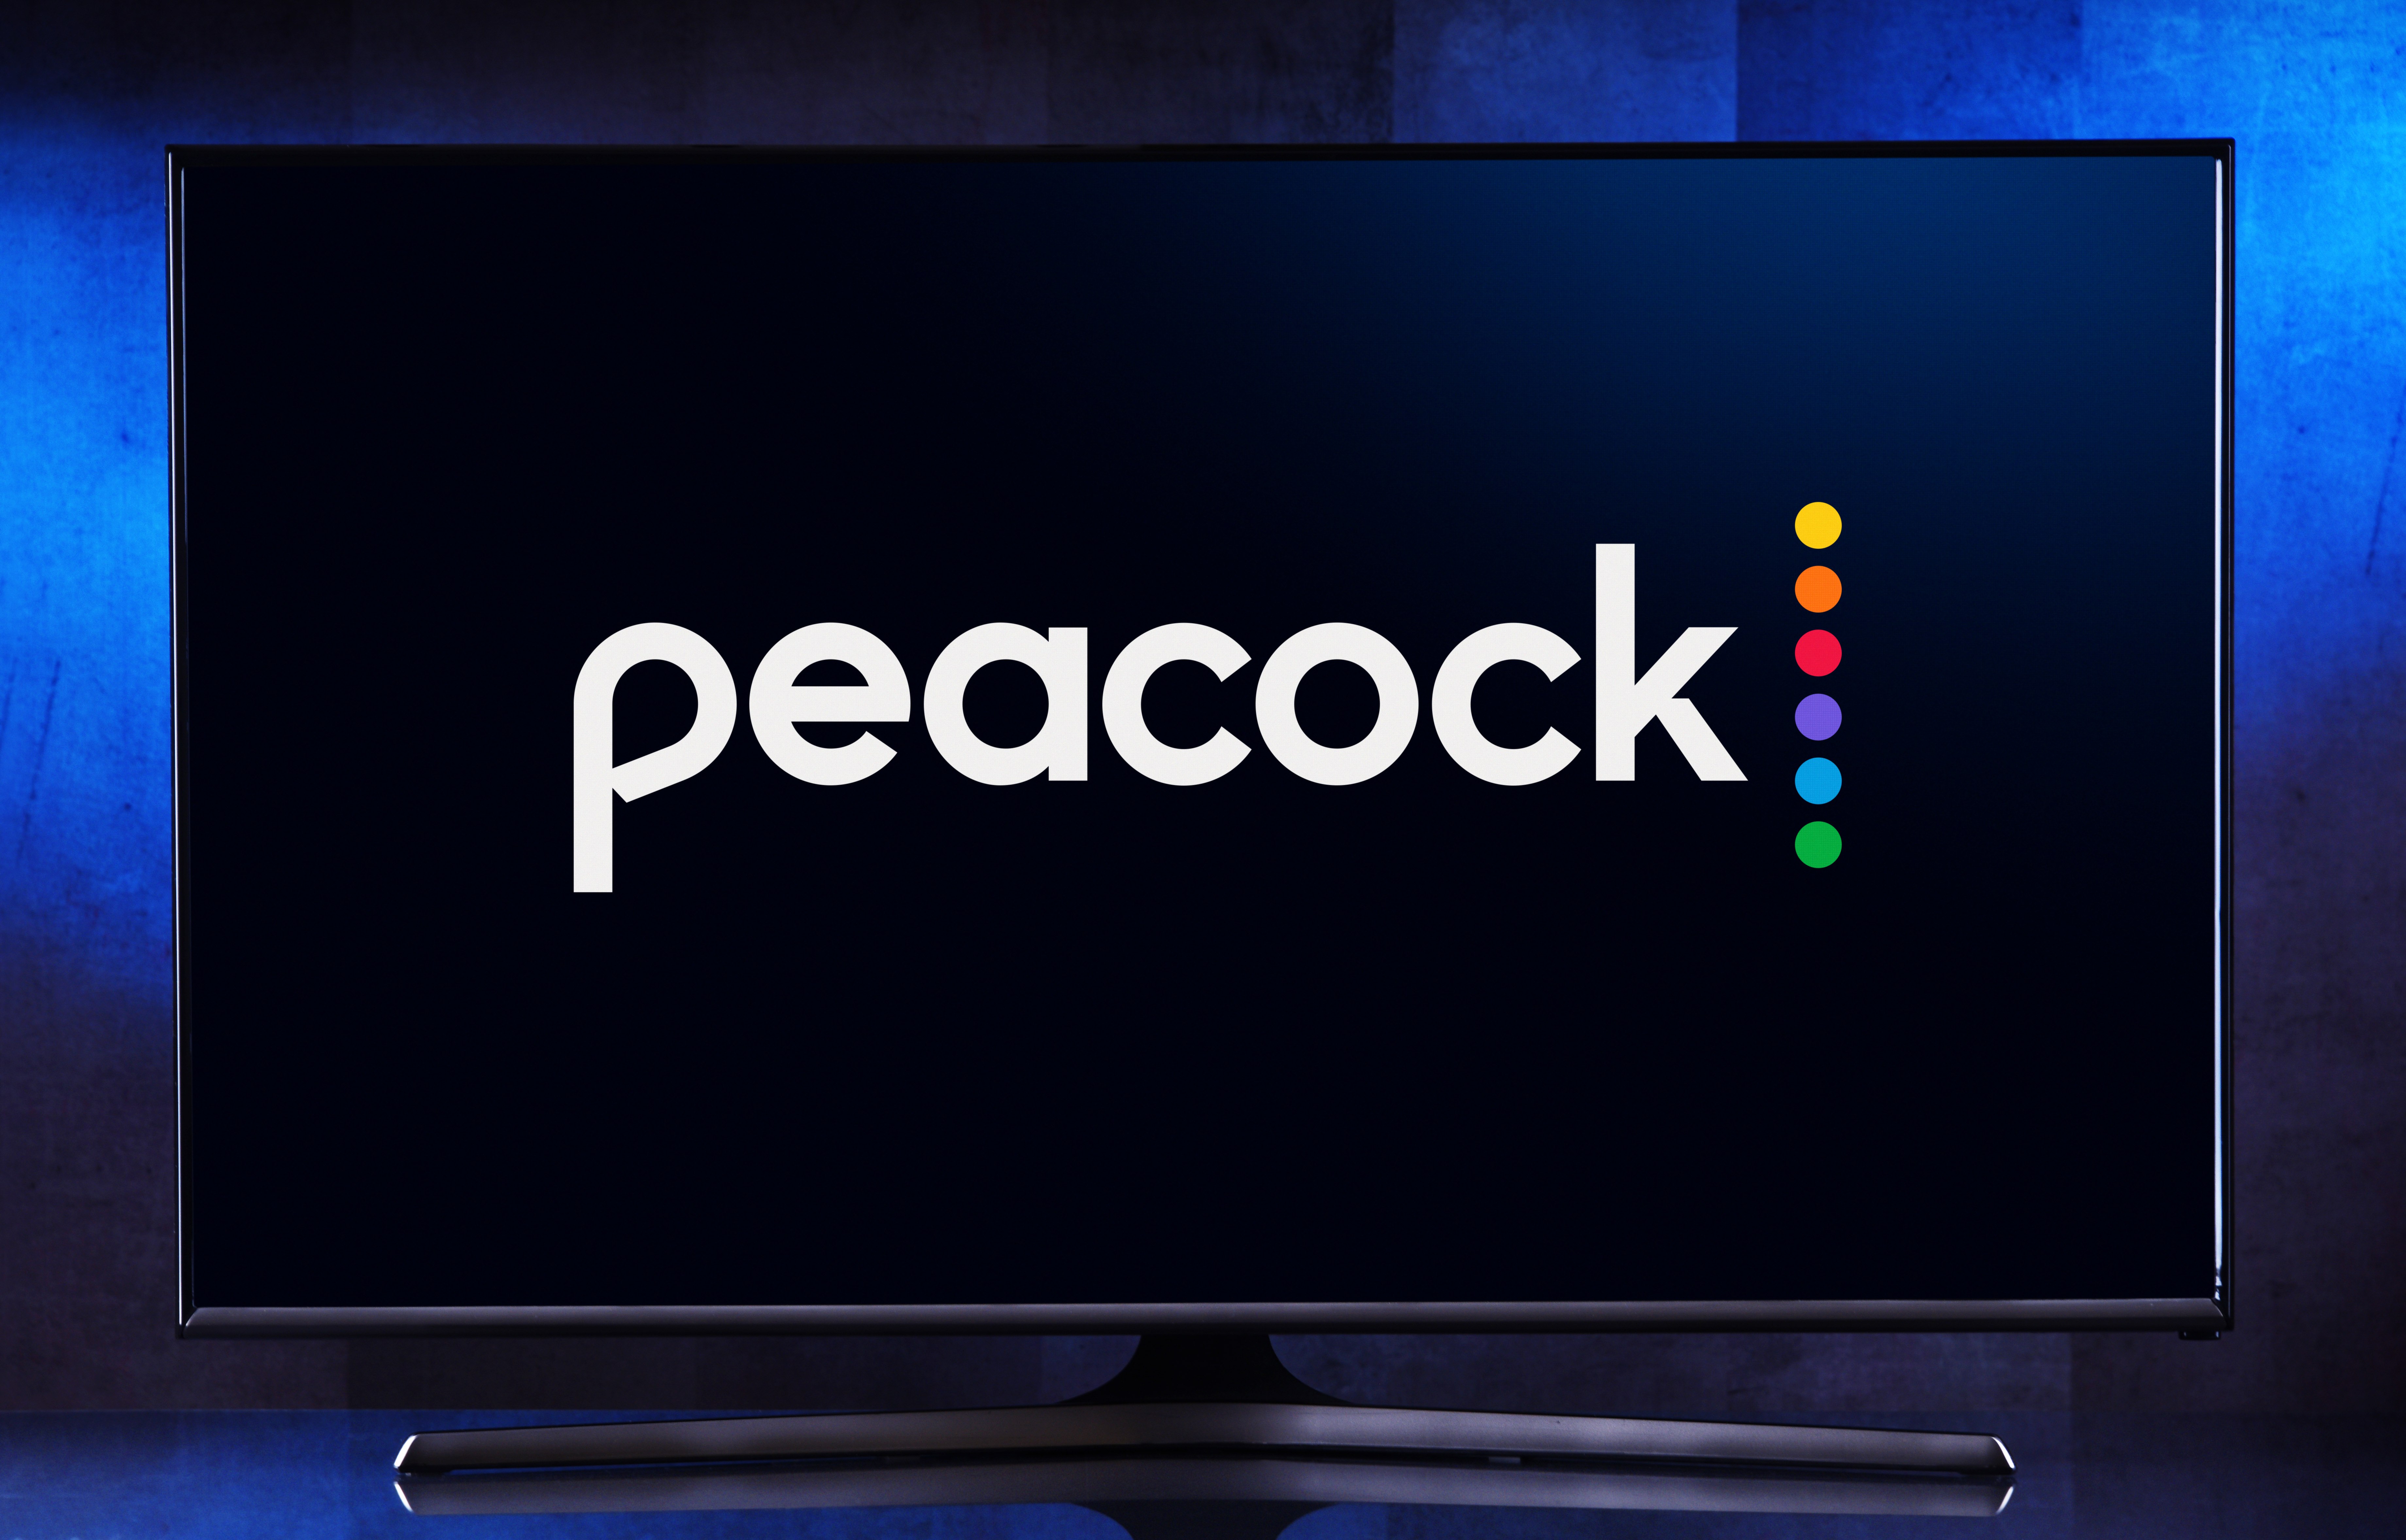 can i watch the nfl game tonight on peacock